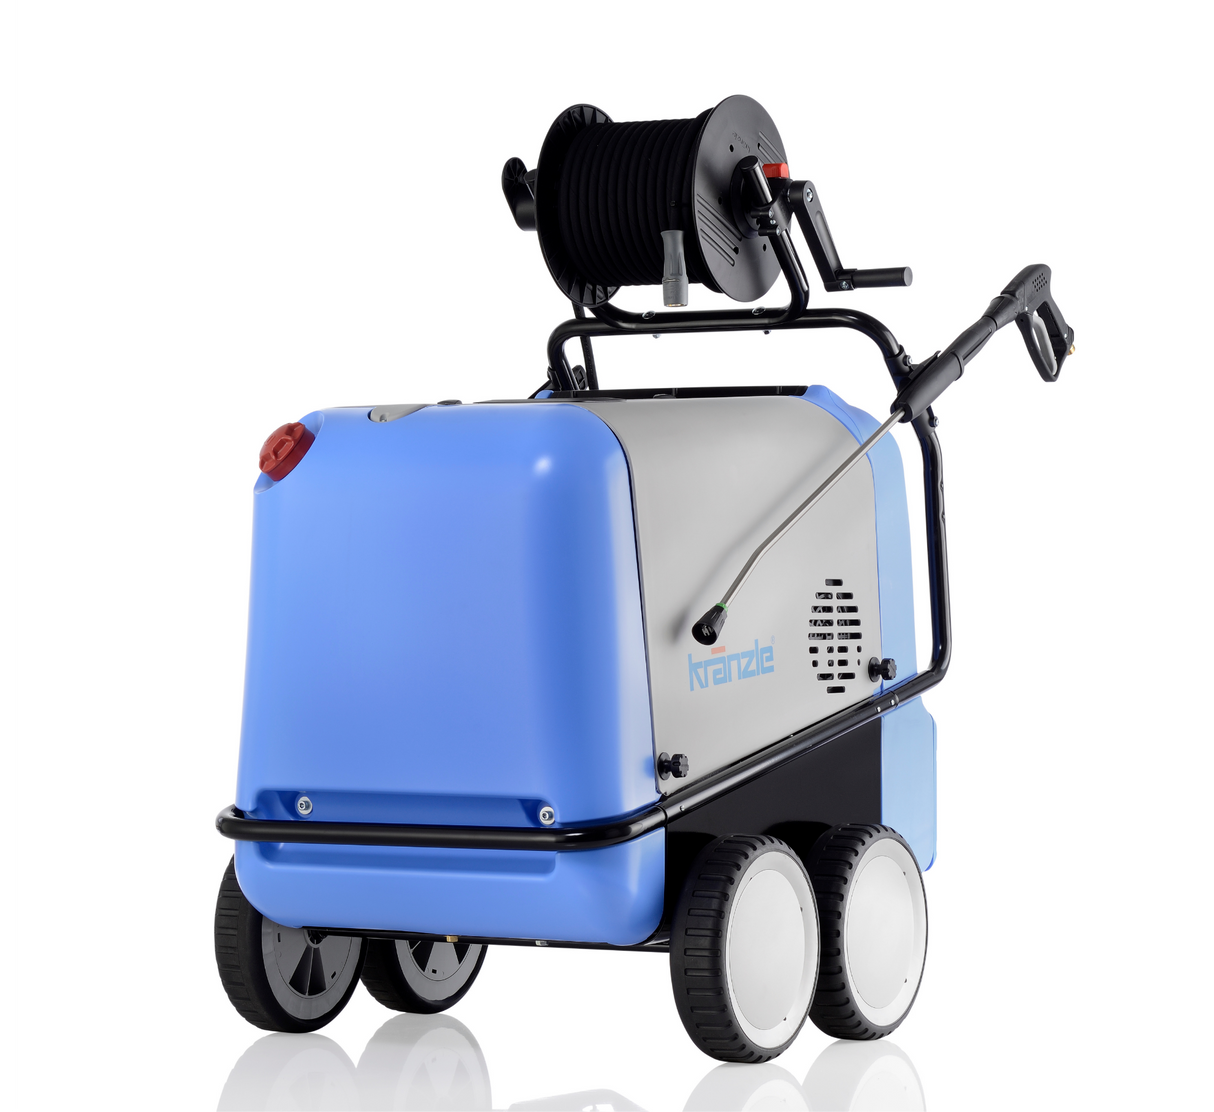 Kranzle KTH635-1, 1885psi High Pressure Hot Water And Steam Cleaner